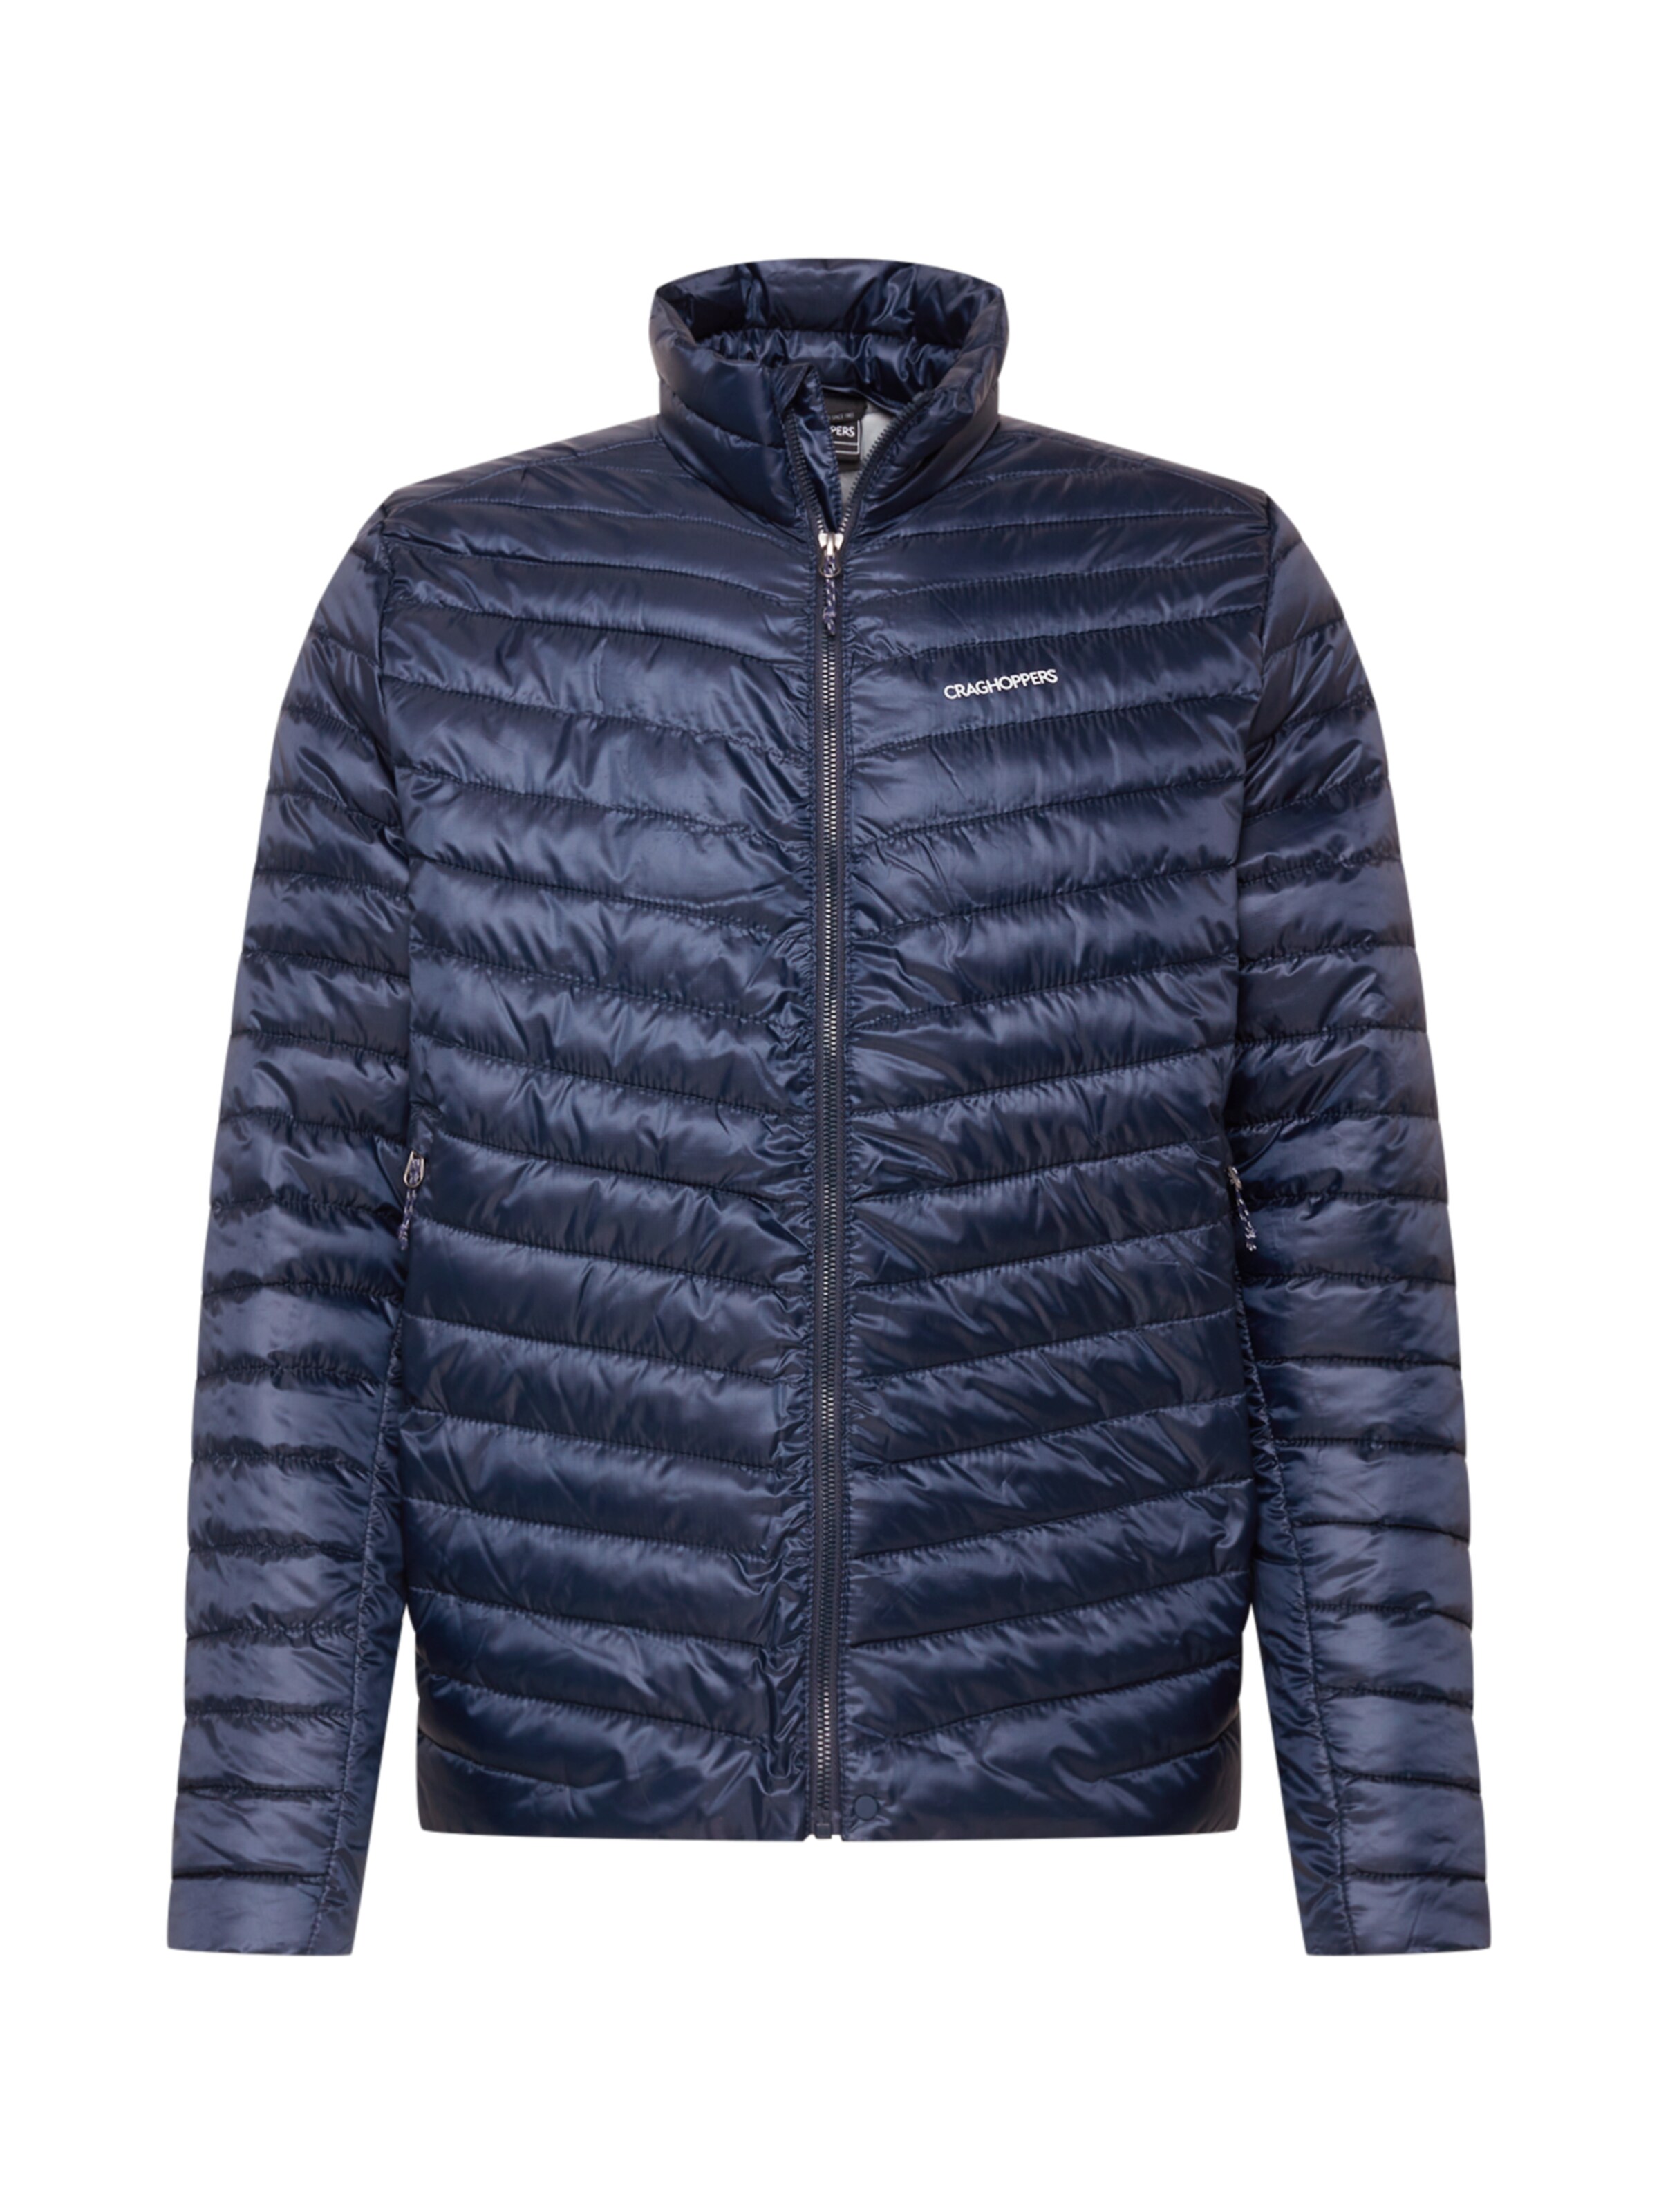 CRAGHOPPERS Giacca per outdoor ExpoLite in Navy 